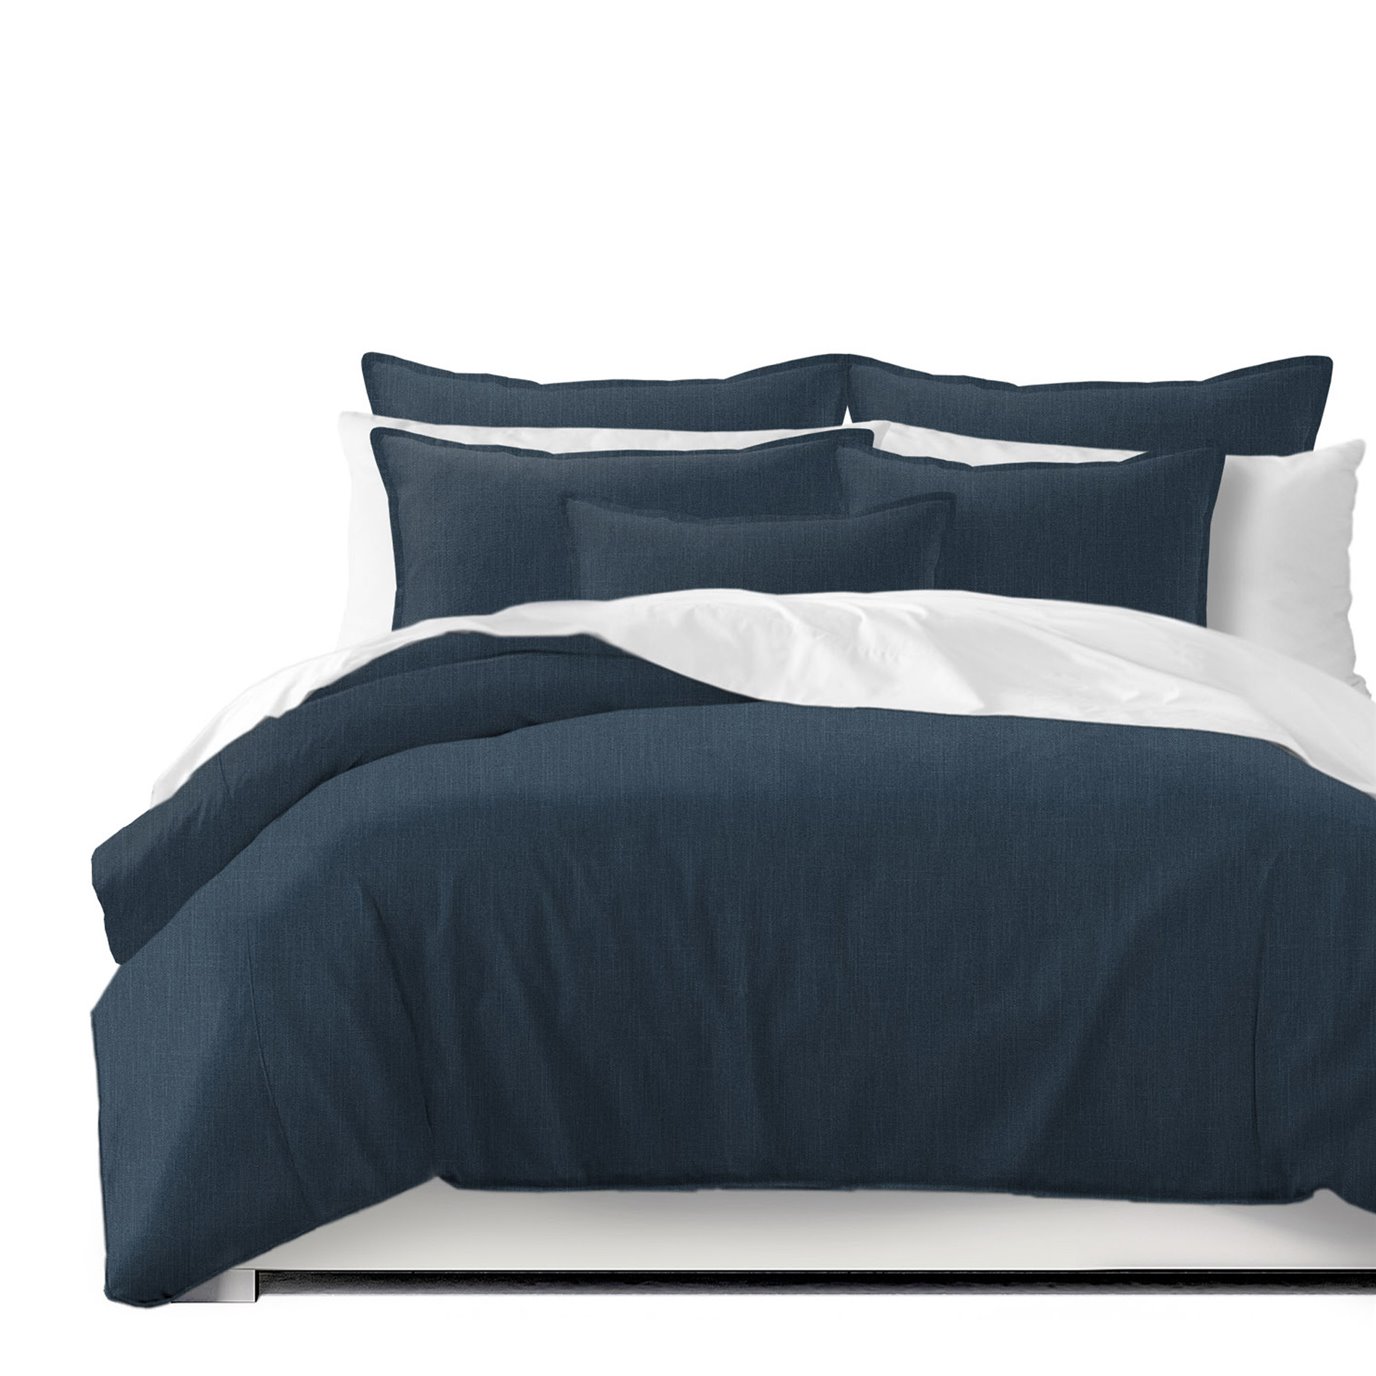 Sutton Navy Duvet Cover and Pillow Sham(s) Set - Size Twin